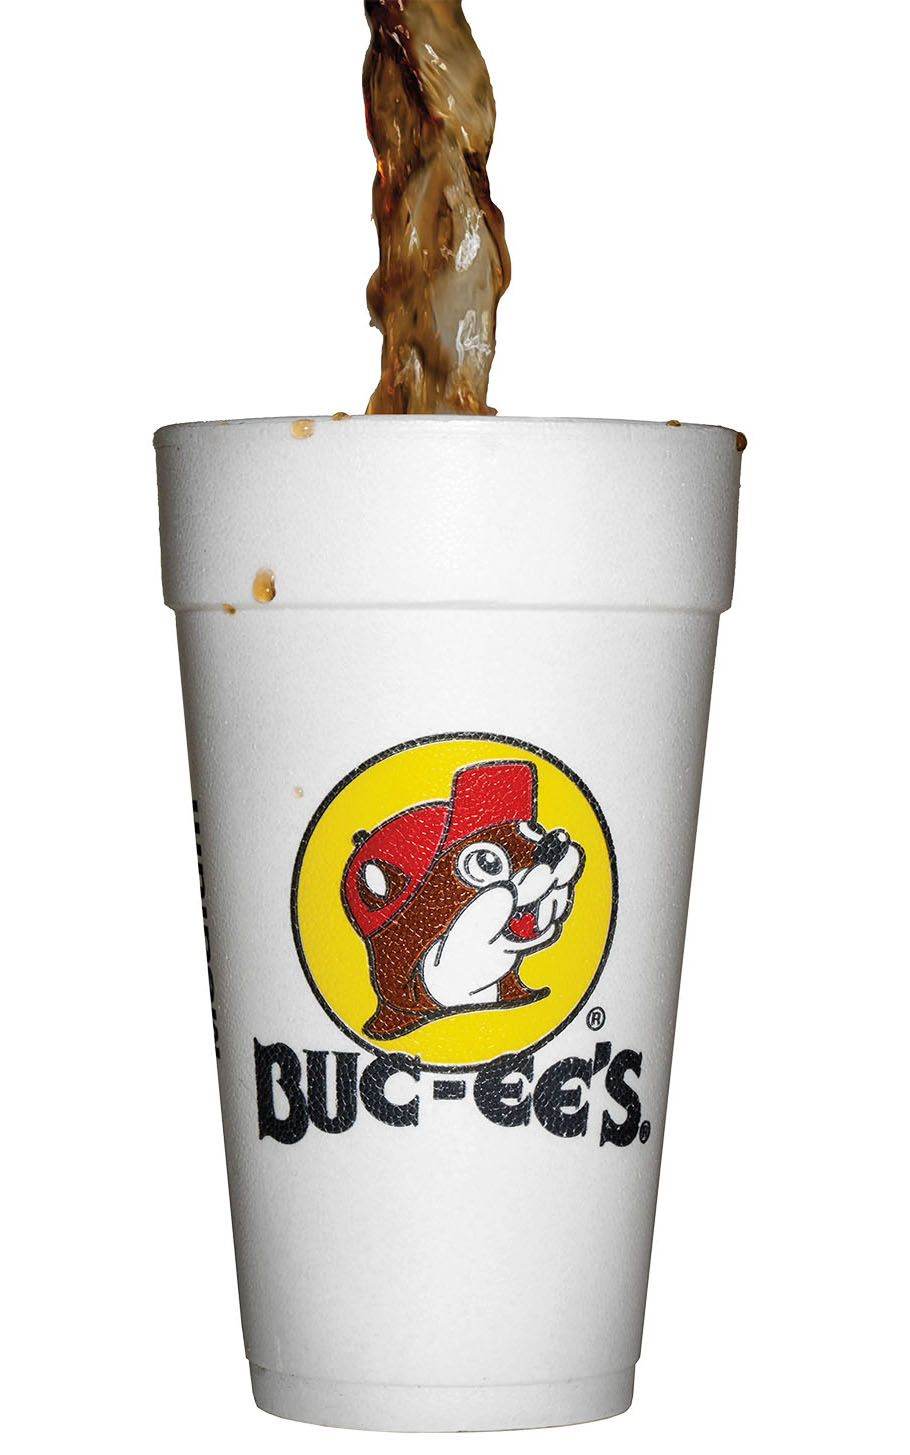 A styrofoam Buc-ees cup being filled with dark cola